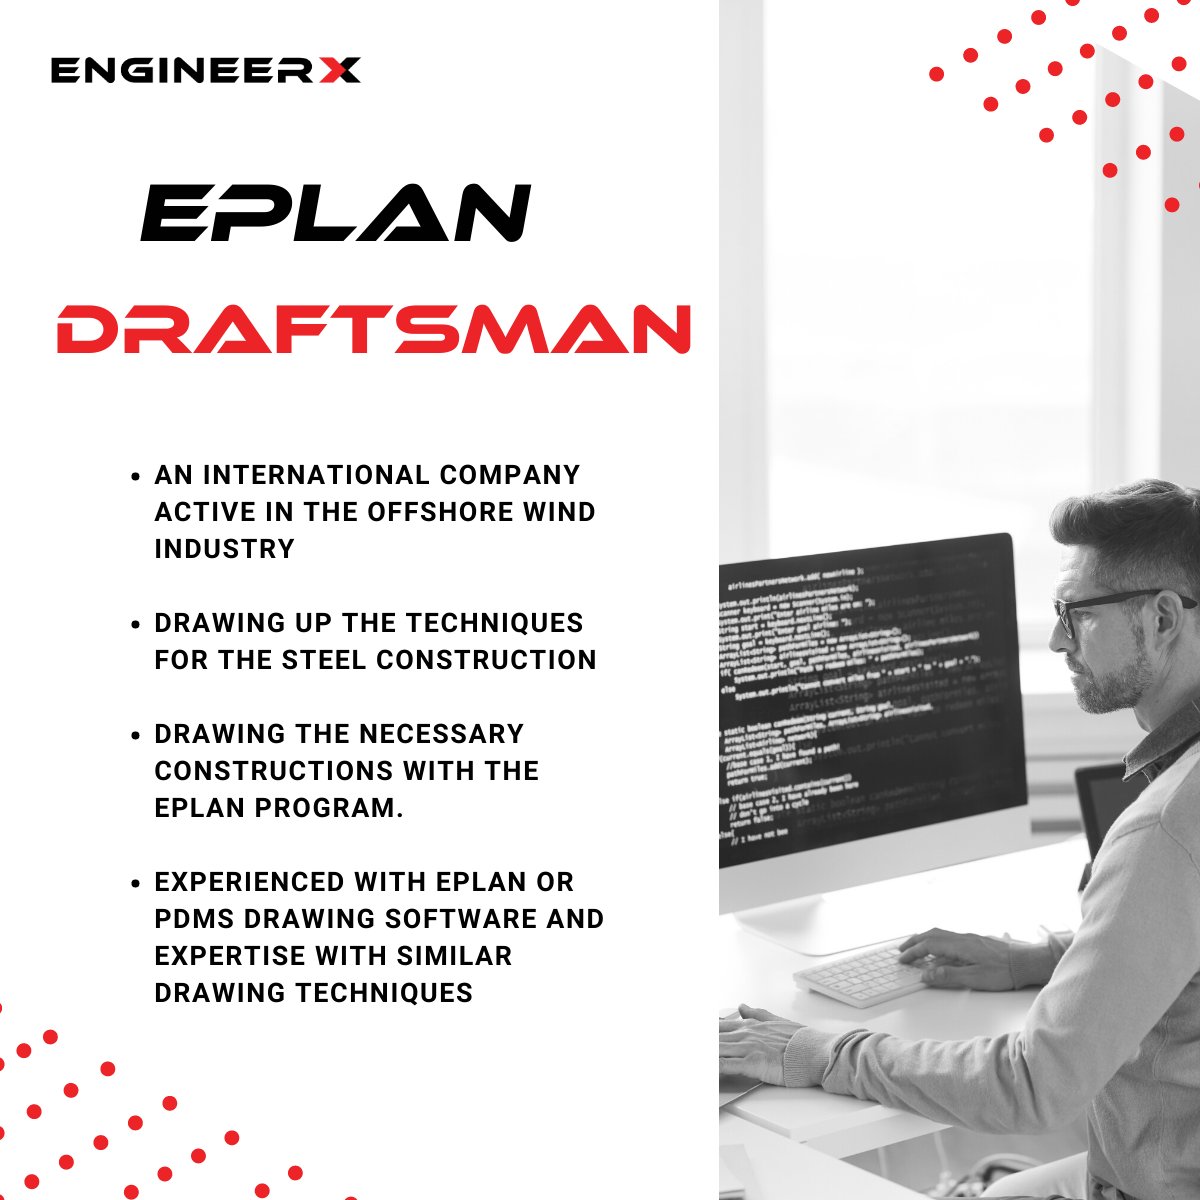 ❗New Position for Eplan Draftsman❗

▪️ Do you want to join a growing international company, contributing to the construction of the offshore wind industry?

👉🏼 Check the Job Description: lnkd.in/eBq9tX8F

✉️ Apply: Aristotelis@EngineerX.com

#belgiumjobs #engineeringjobs…